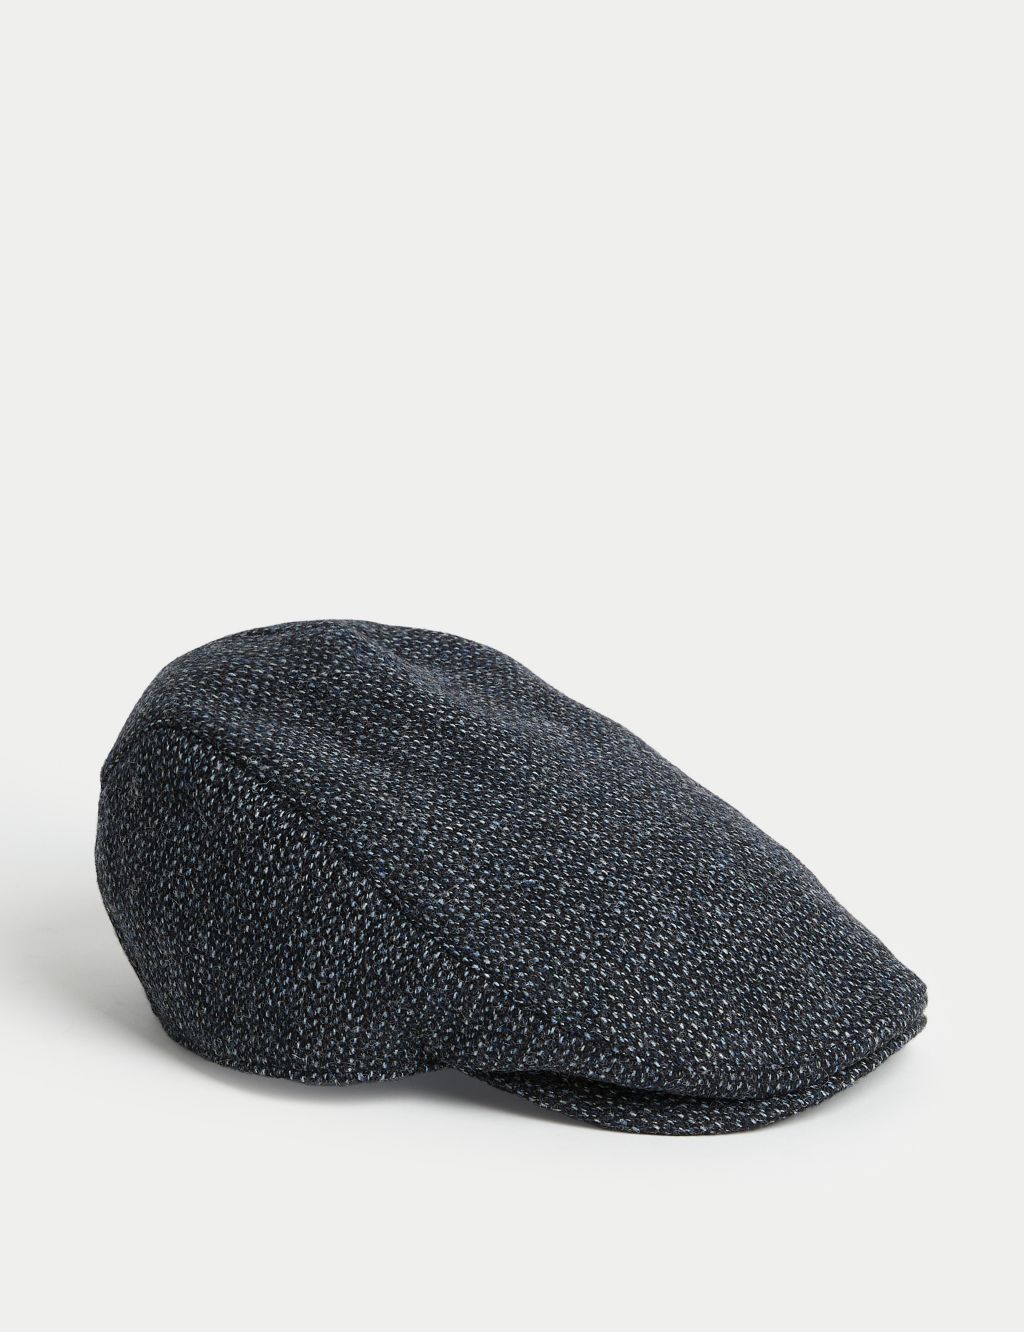 Wool Rich Textured Flat Cap with Stormwear™ image 1